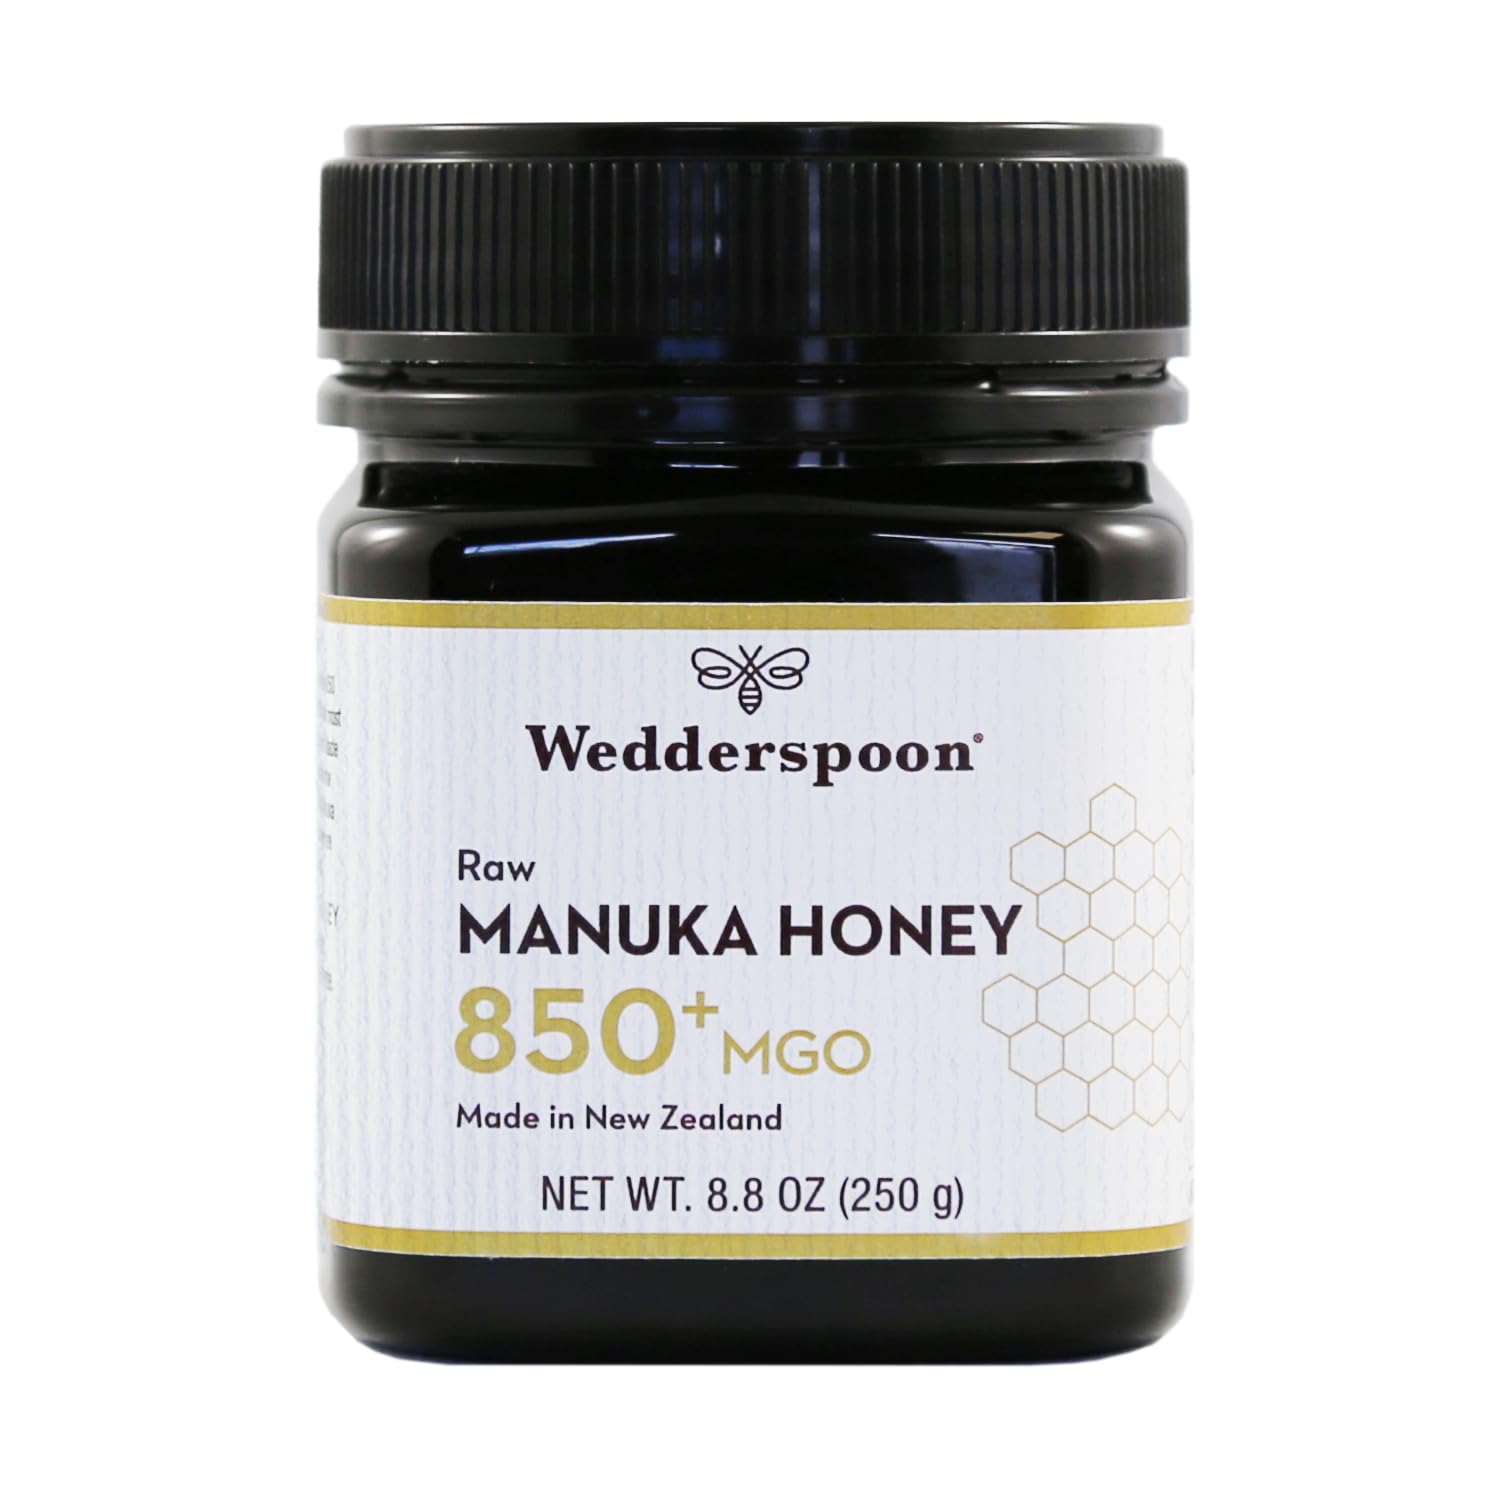 Wedderspoon Raw Premium Manuka Honey, MGO 850, 8.8 Oz, Unpasteurized New Zealand Honey, Traceable from Our Hives to Your Home